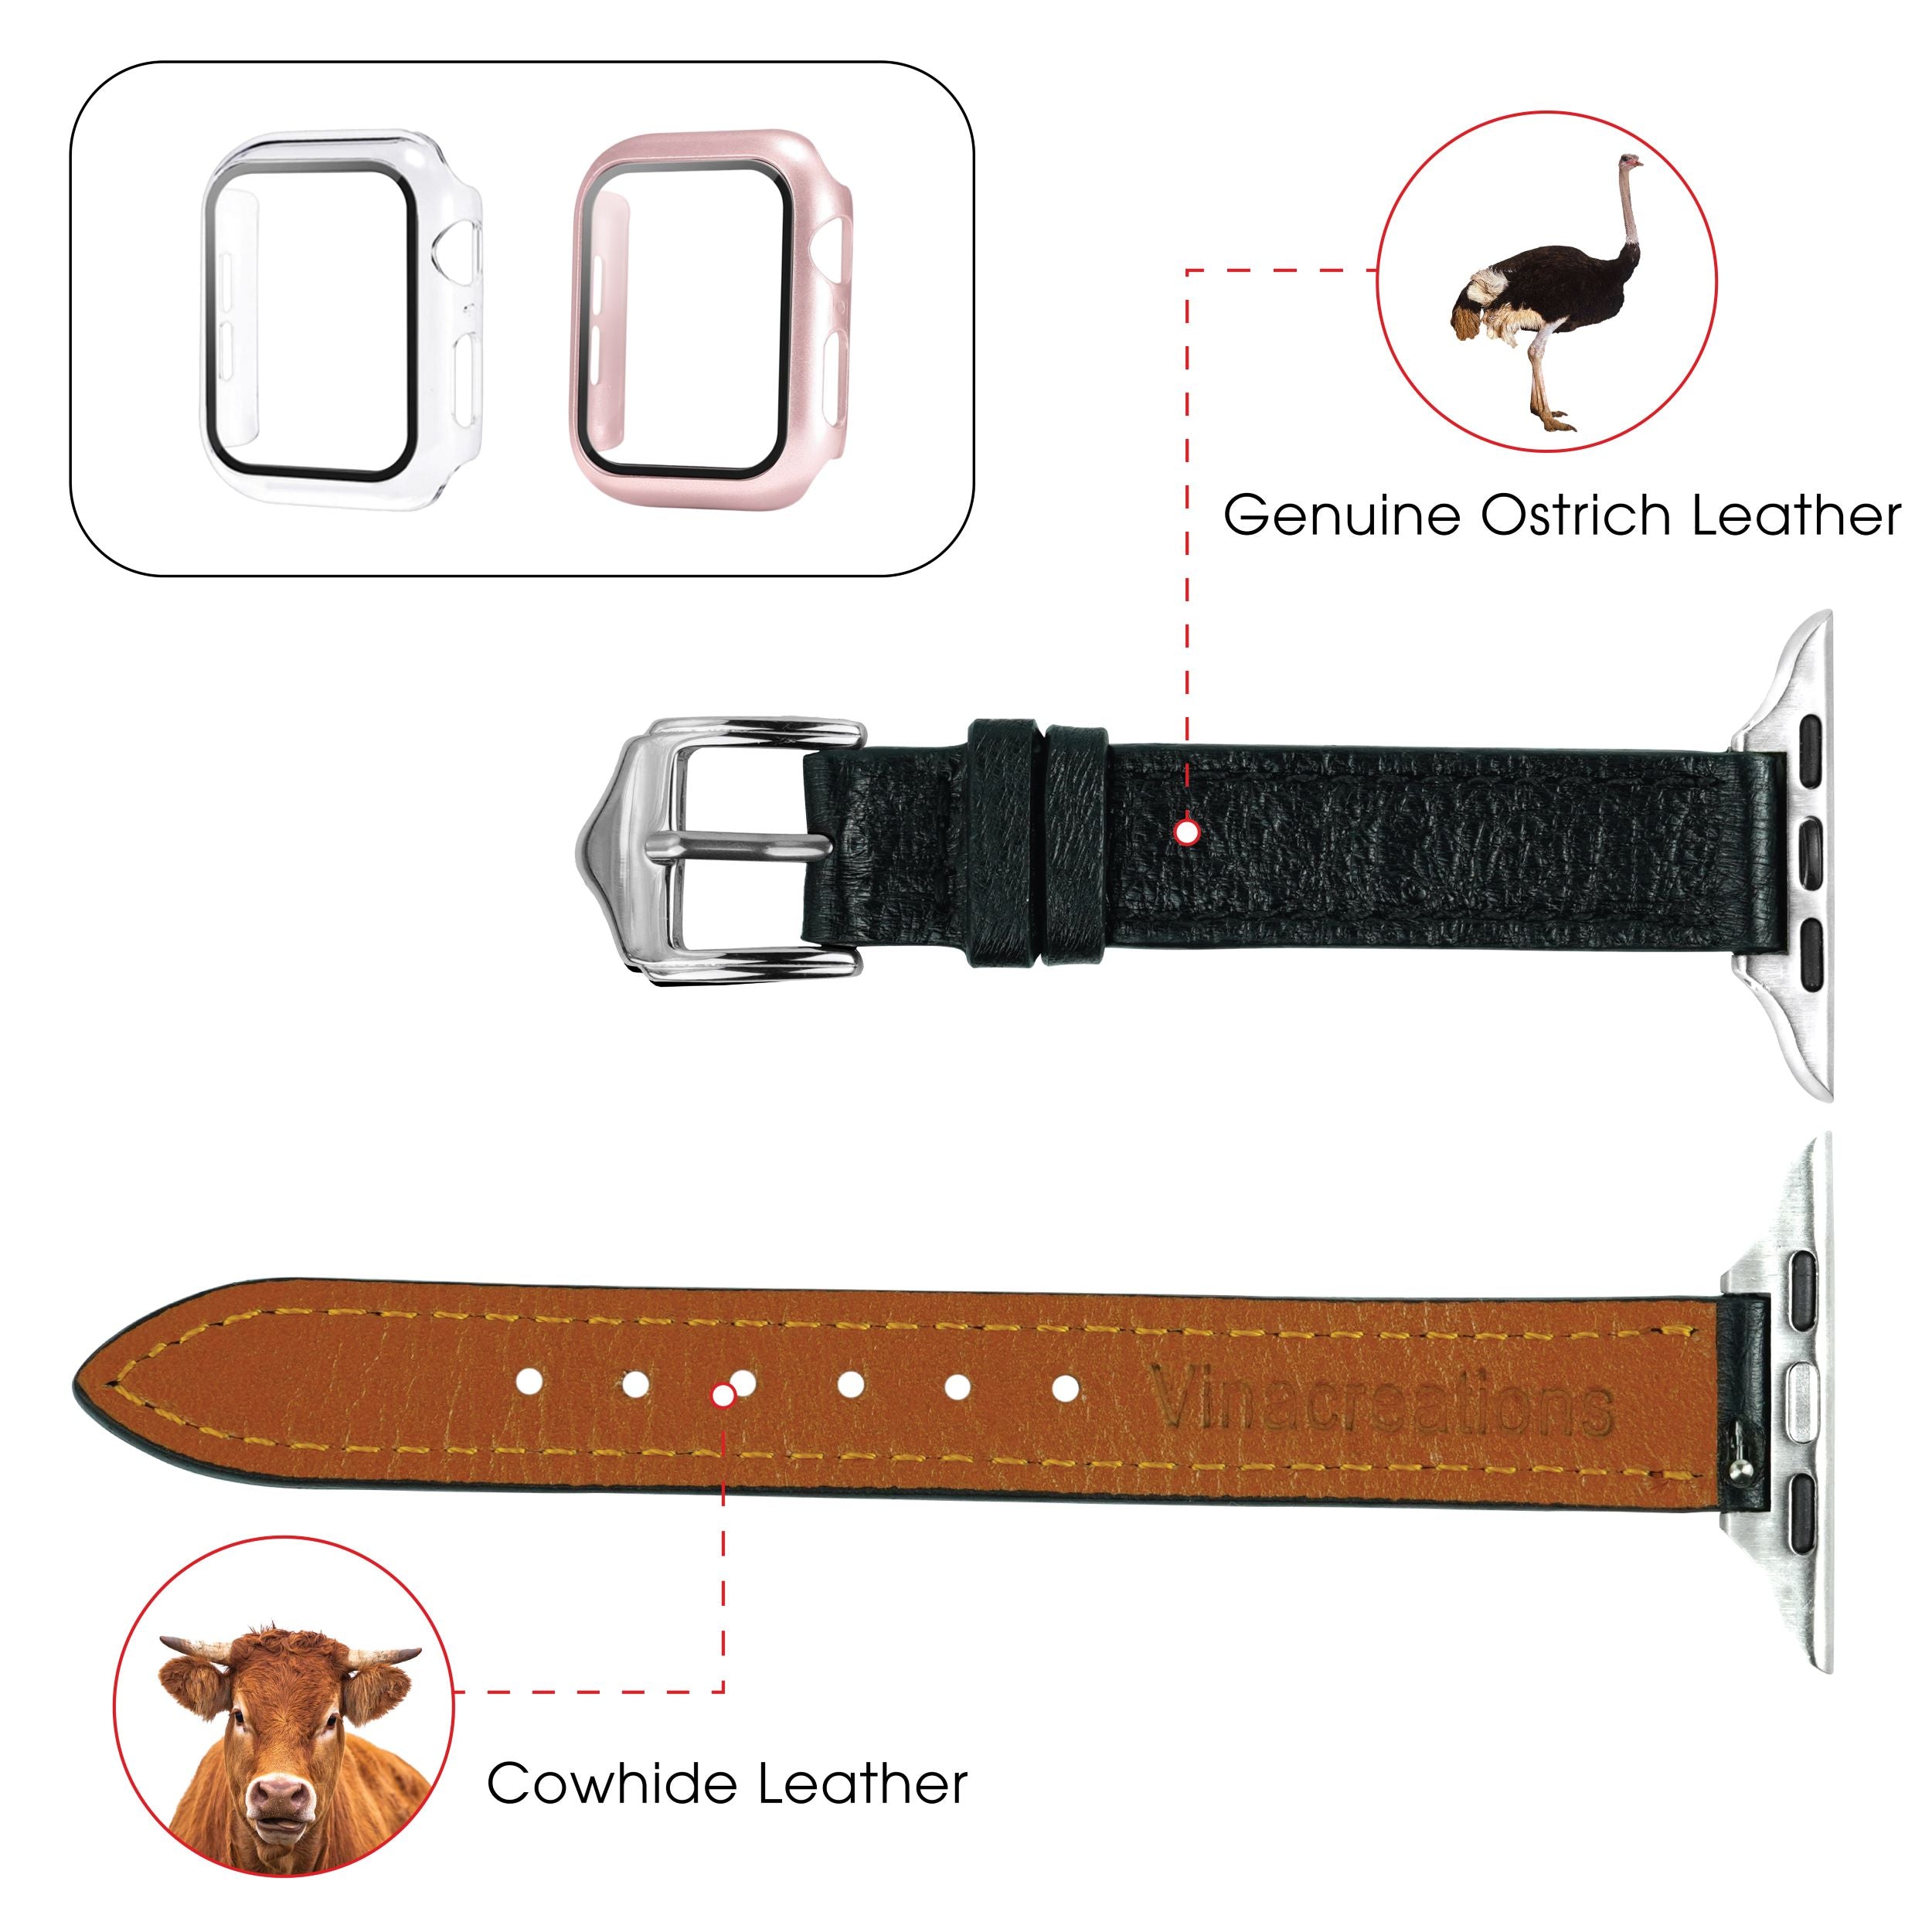 Black Flat Ostrich Leather Band Compatible Apple Watch Iwatch 40mm Screen Protector Case Silver Adapter Replacement Strap For Smartwatch Series 4 5 6 SE Leather Handmade AW-181S-W-40MM